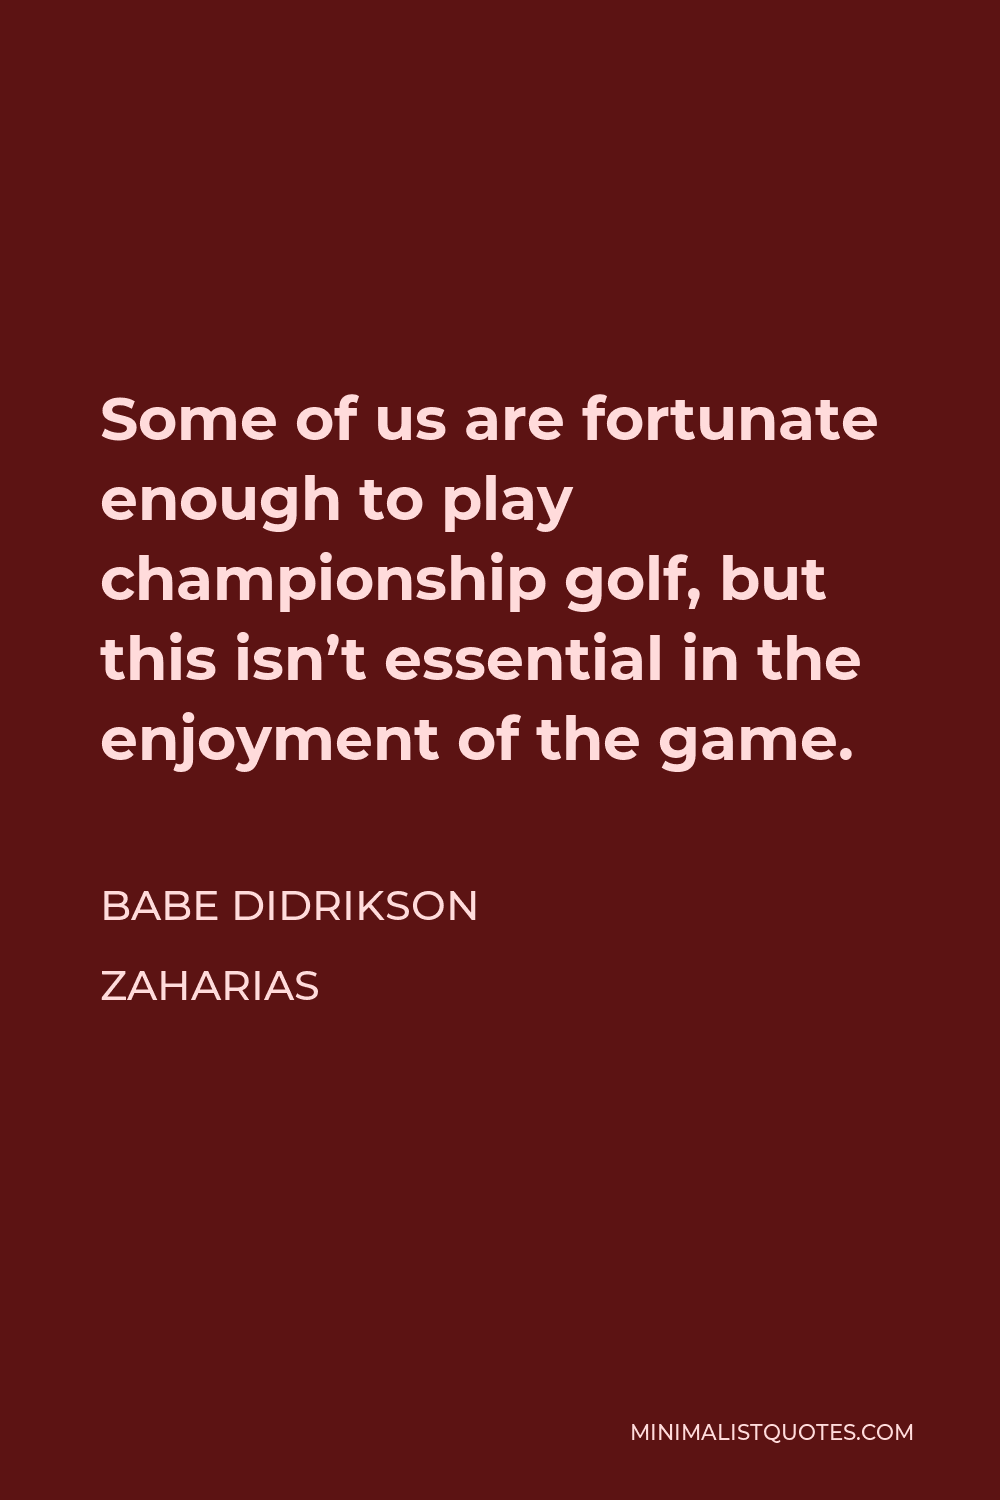 Babe Didrikson Zaharias Quote - Some of us are fortunate enough to play championship golf, but this isn’t essential in the enjoyment of the game.